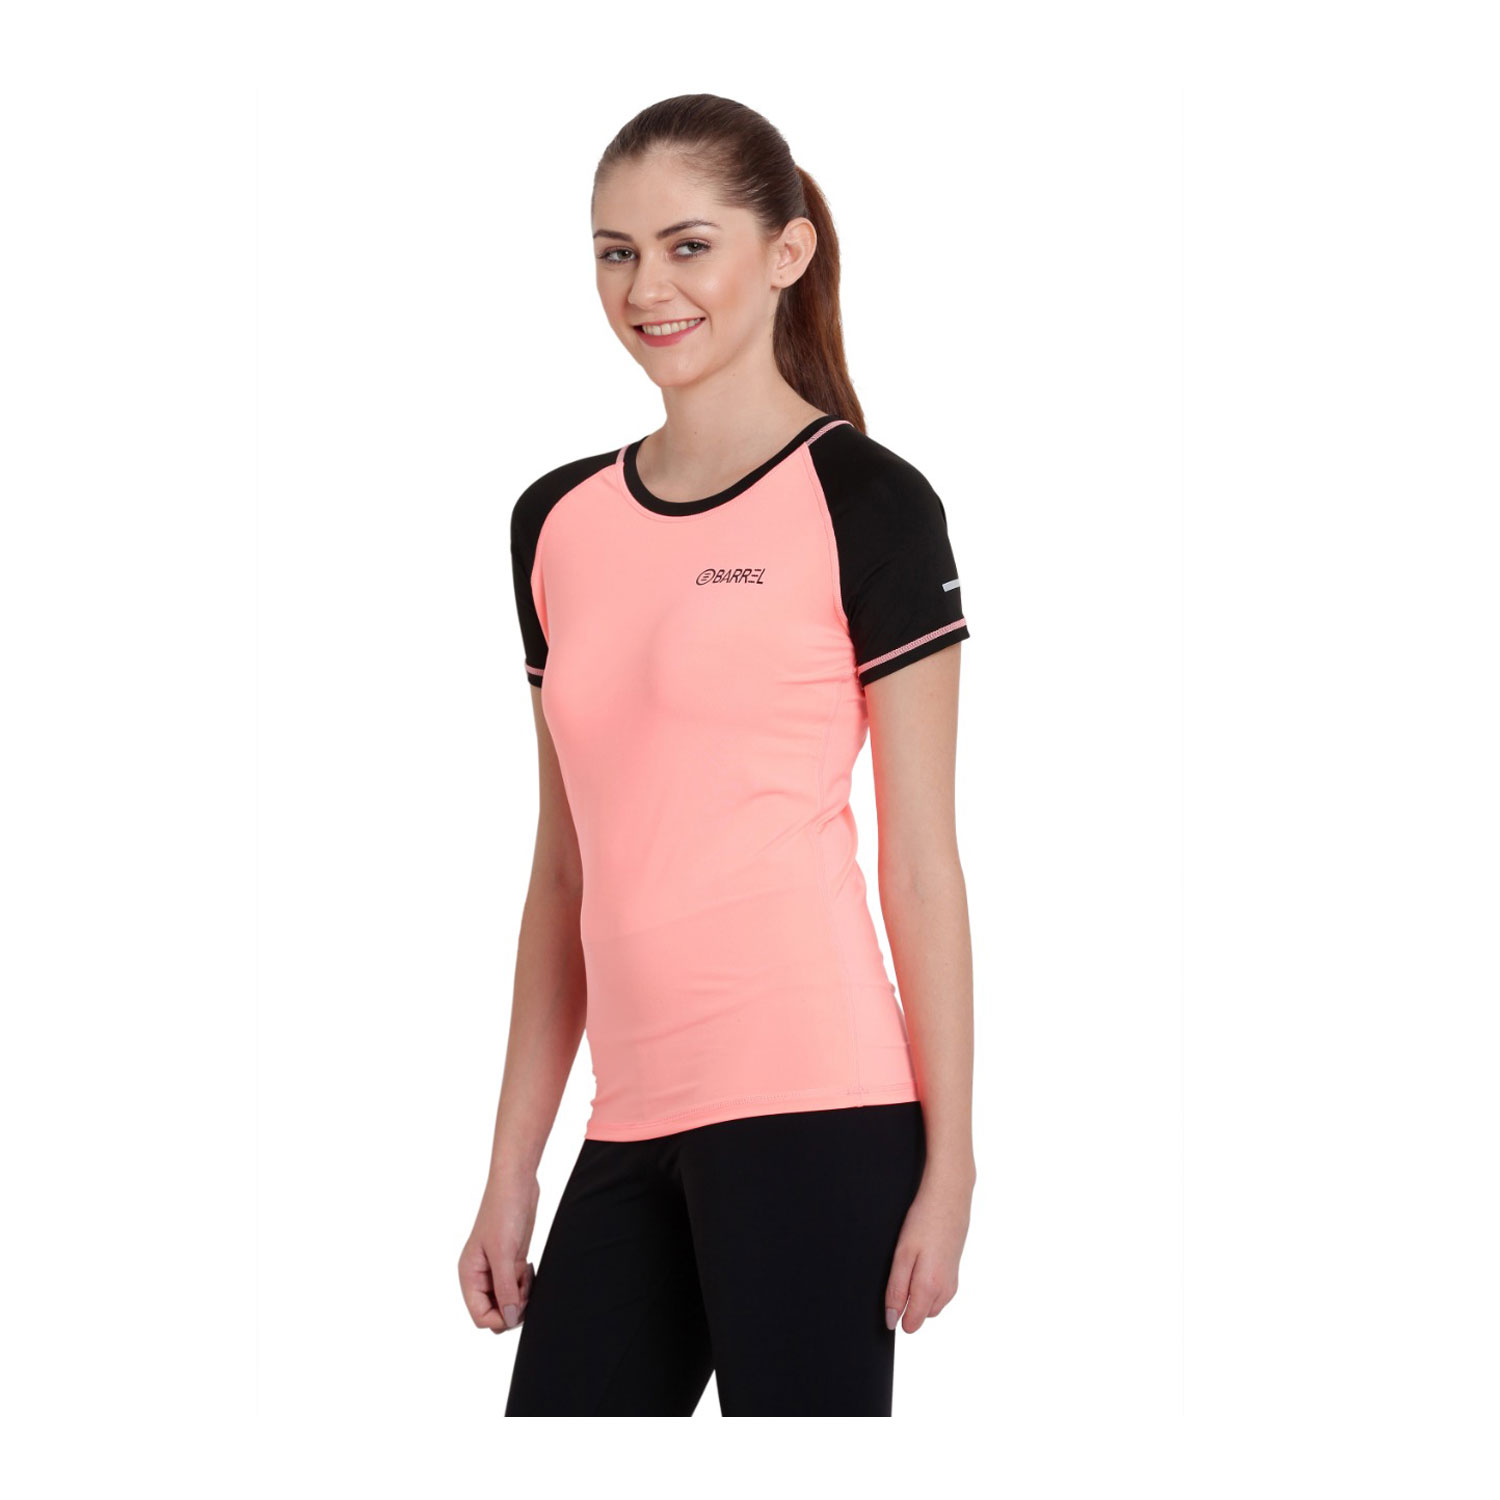 Viral Girl Women's Soft Polyester Active Wear Fabric Sports T-Shirt. | A75 | Pack of 5